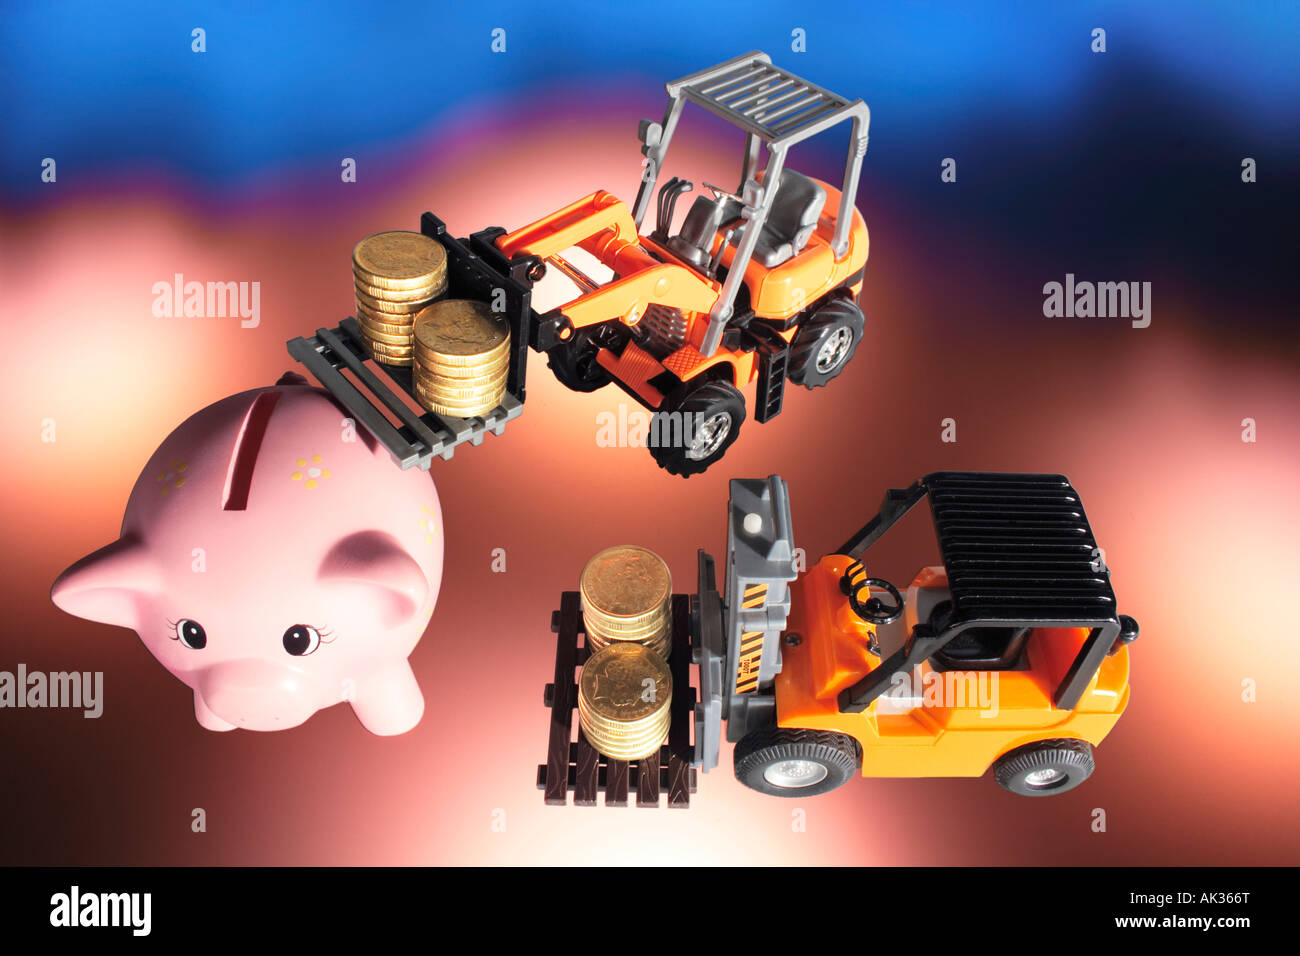 Piggybank and Miniature Forklifts with Coins Stock Photo